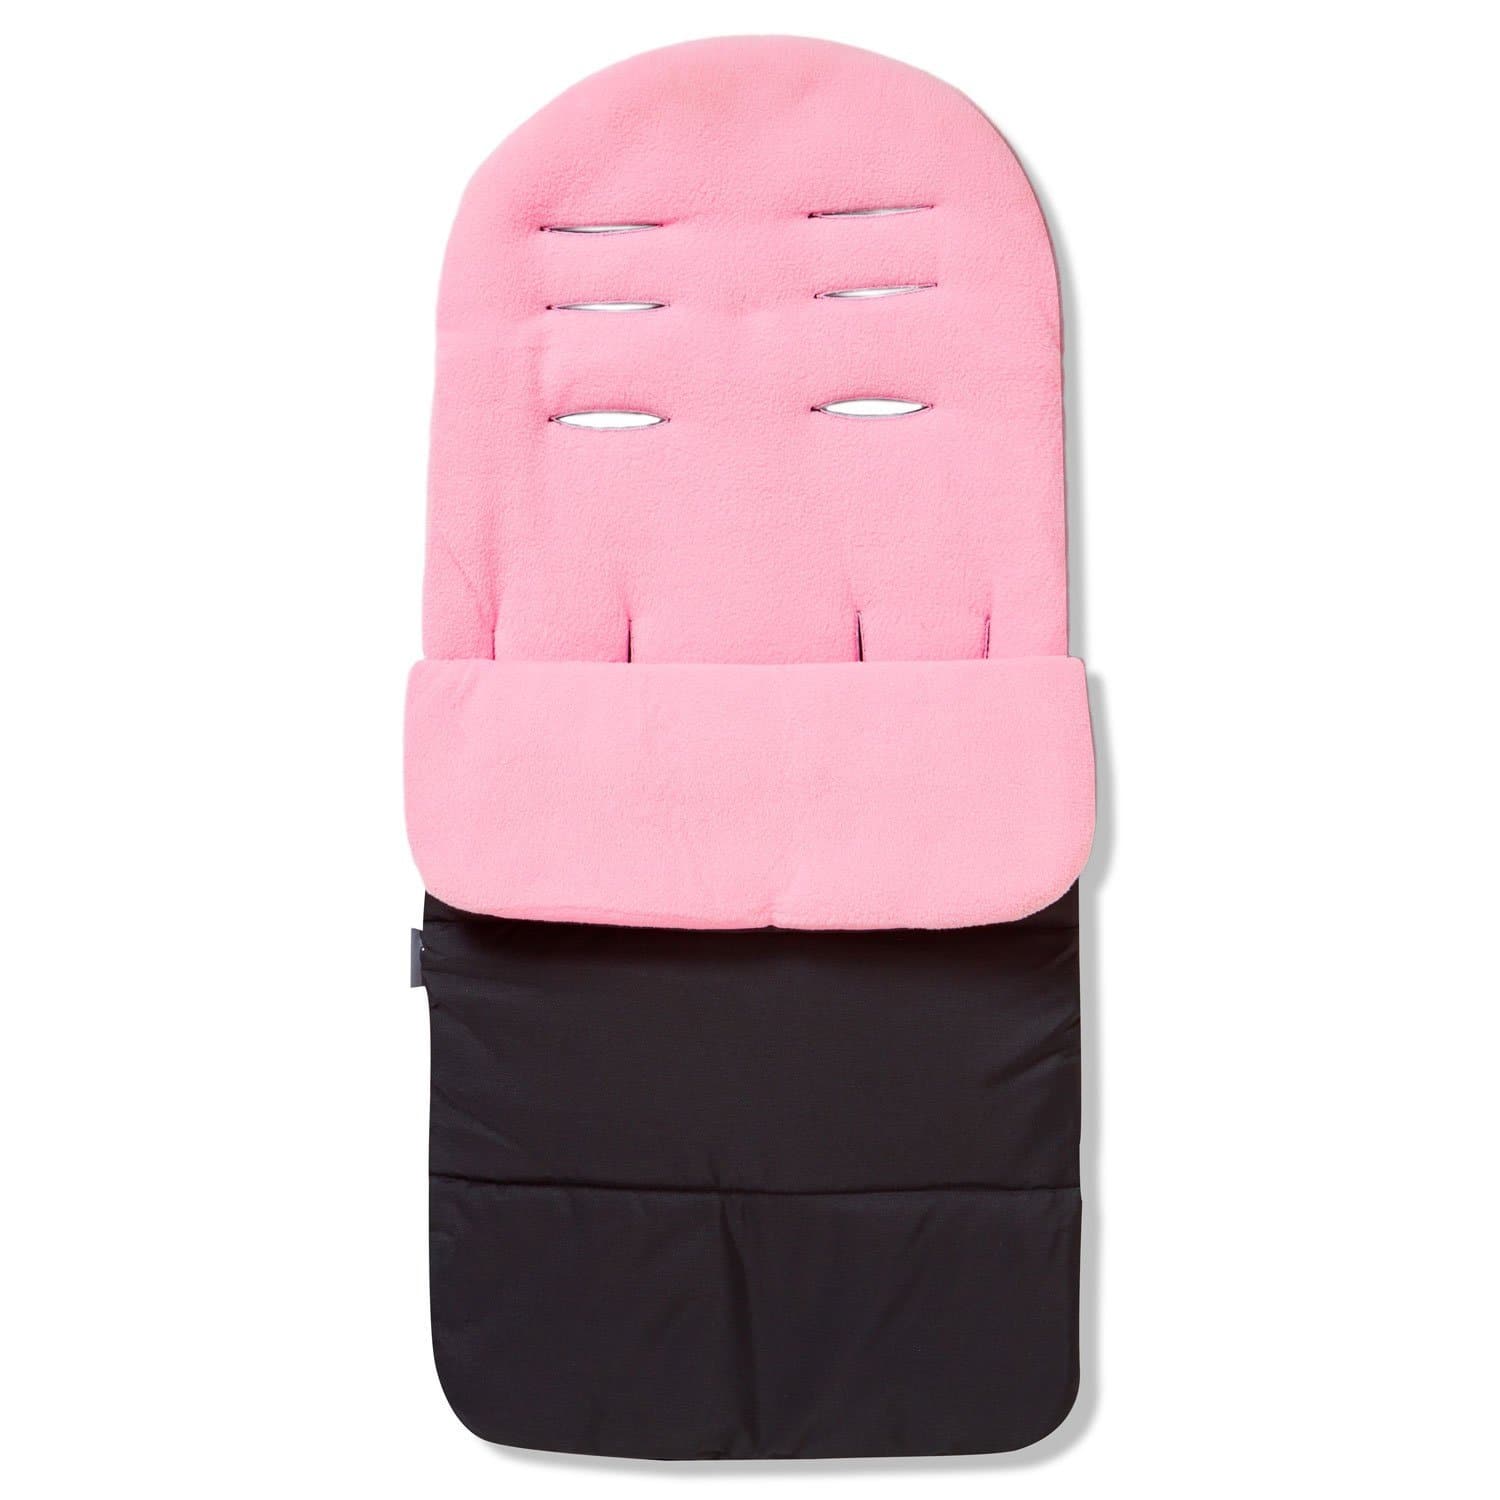 Premium Footmuff / Cosy Toes Compatible with Babywelt - For Your Little One